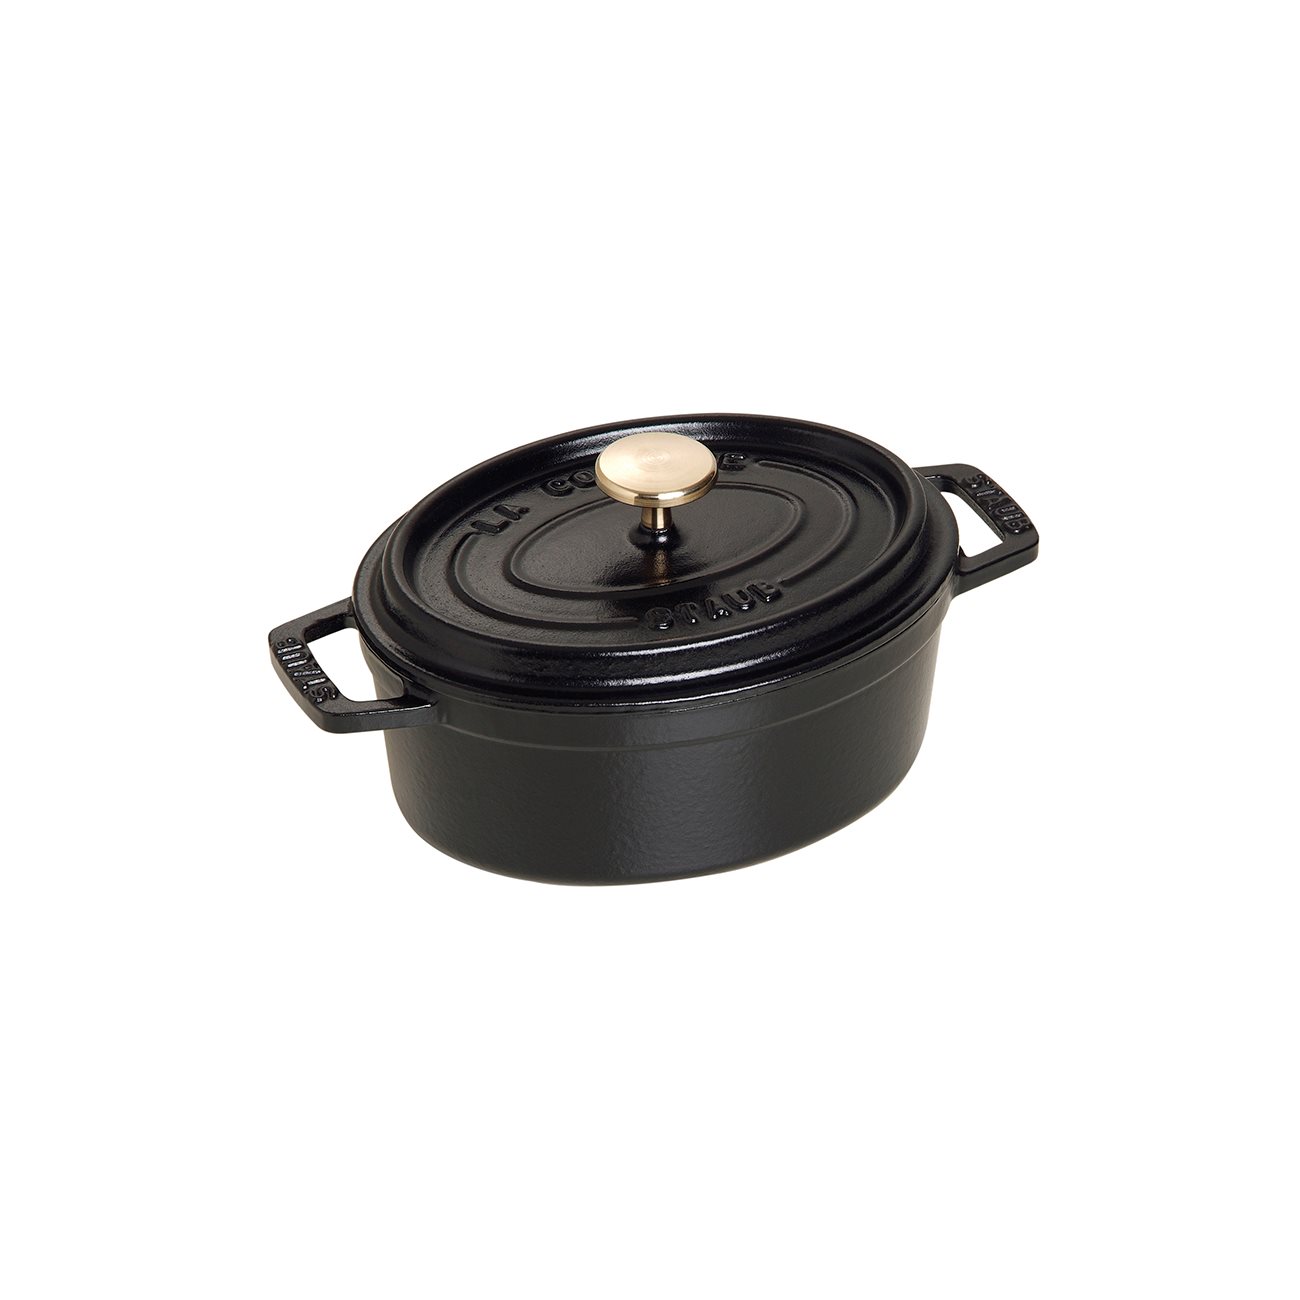 Cocotte oval cooking pot made of cast iron 15 cm /0,6 l, <<Black